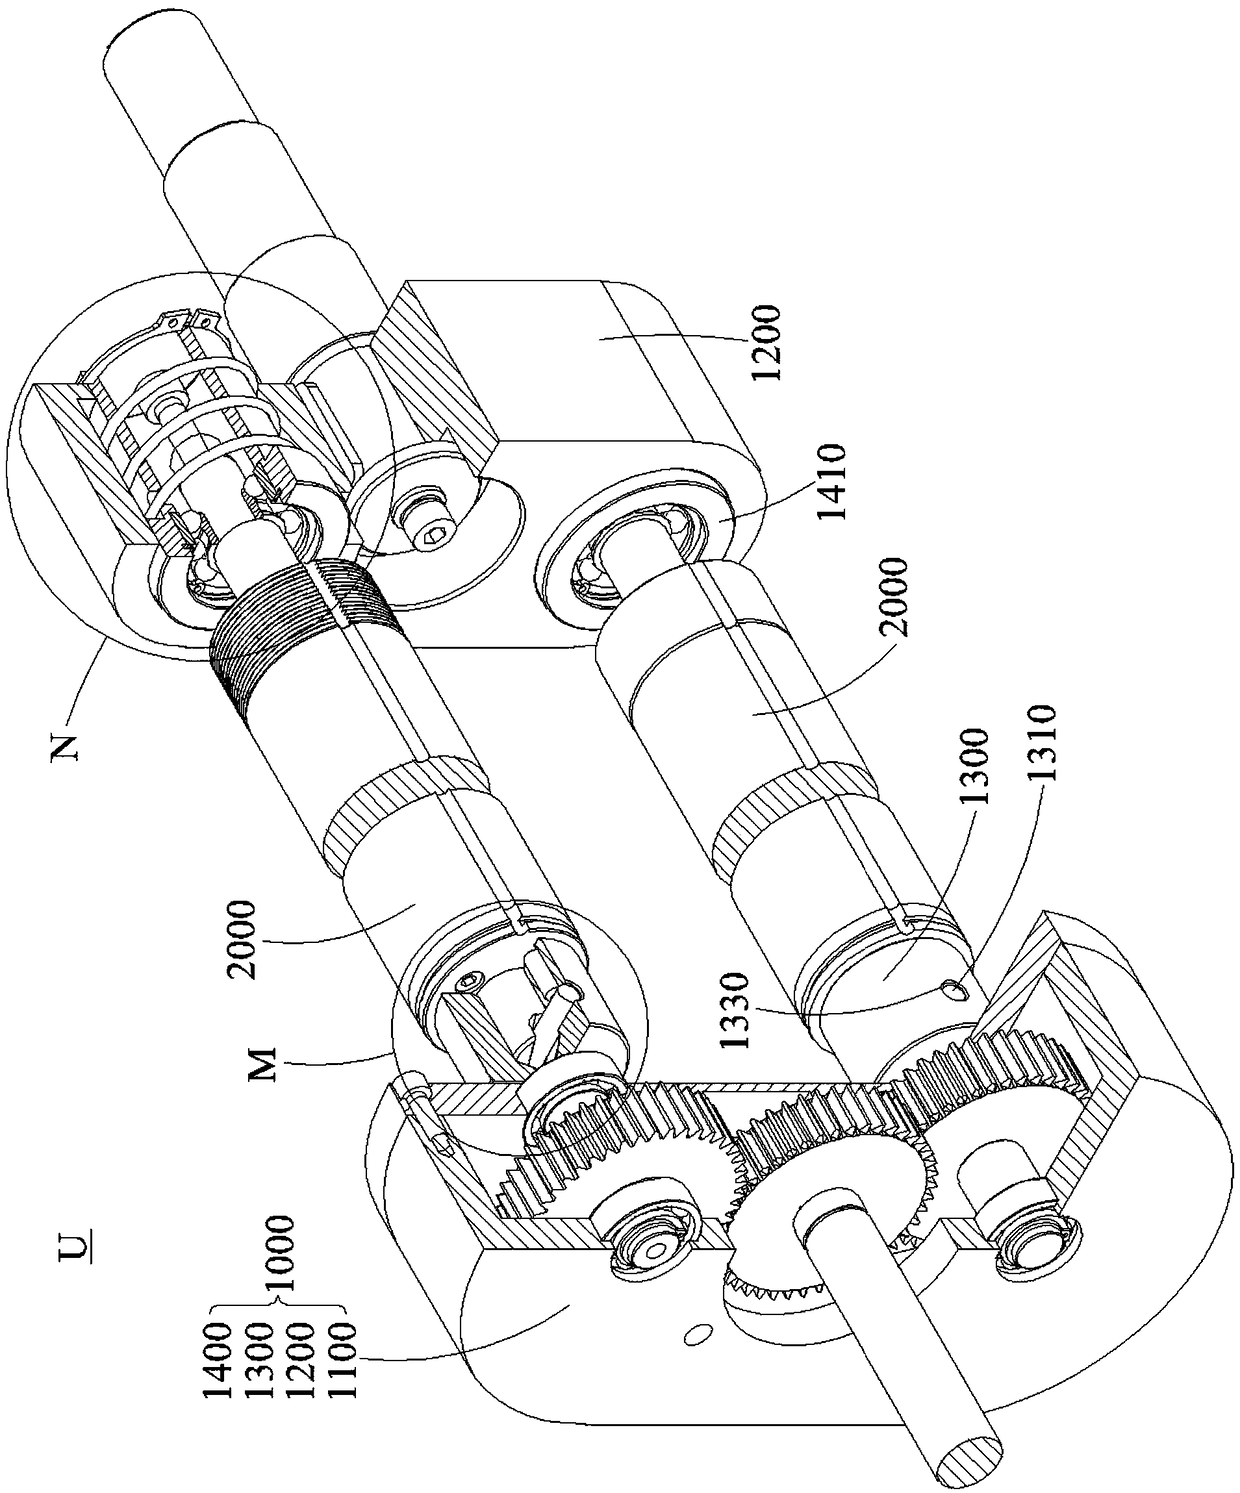 Quick self-locking device and shaft system